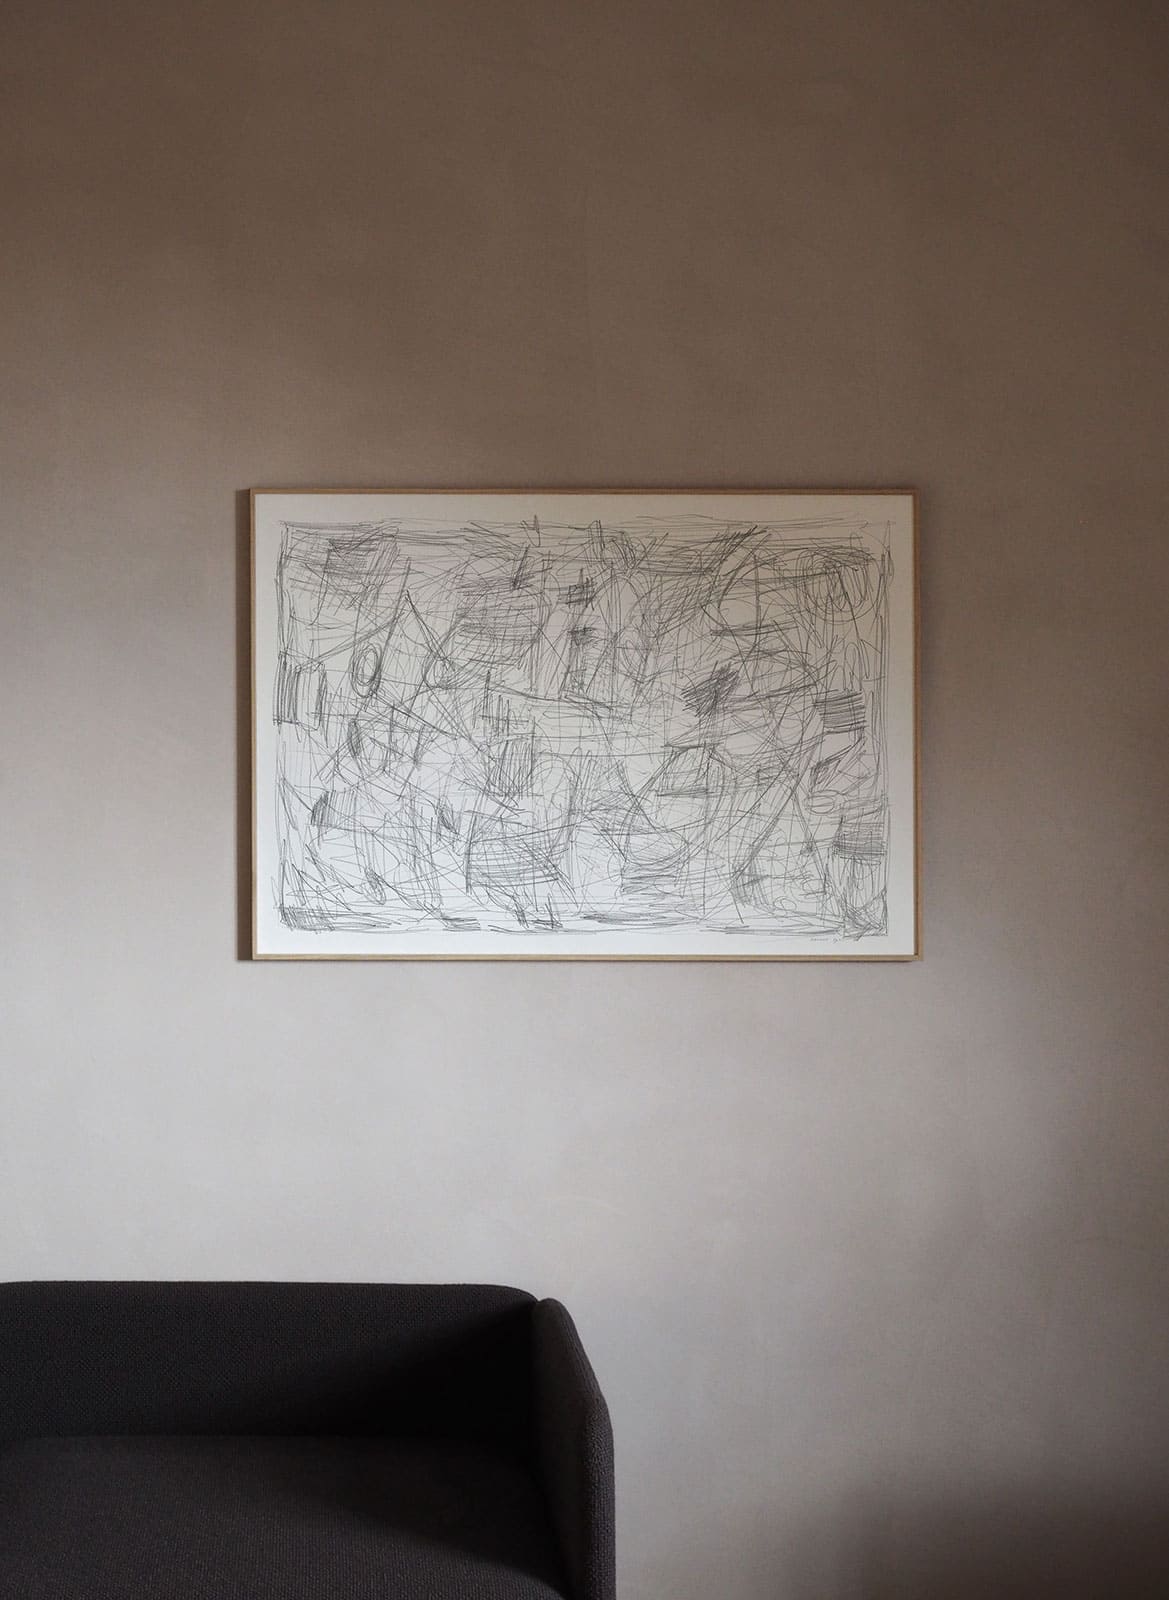 Framed pencil drawing poster hanging above couch by Atelier Cph